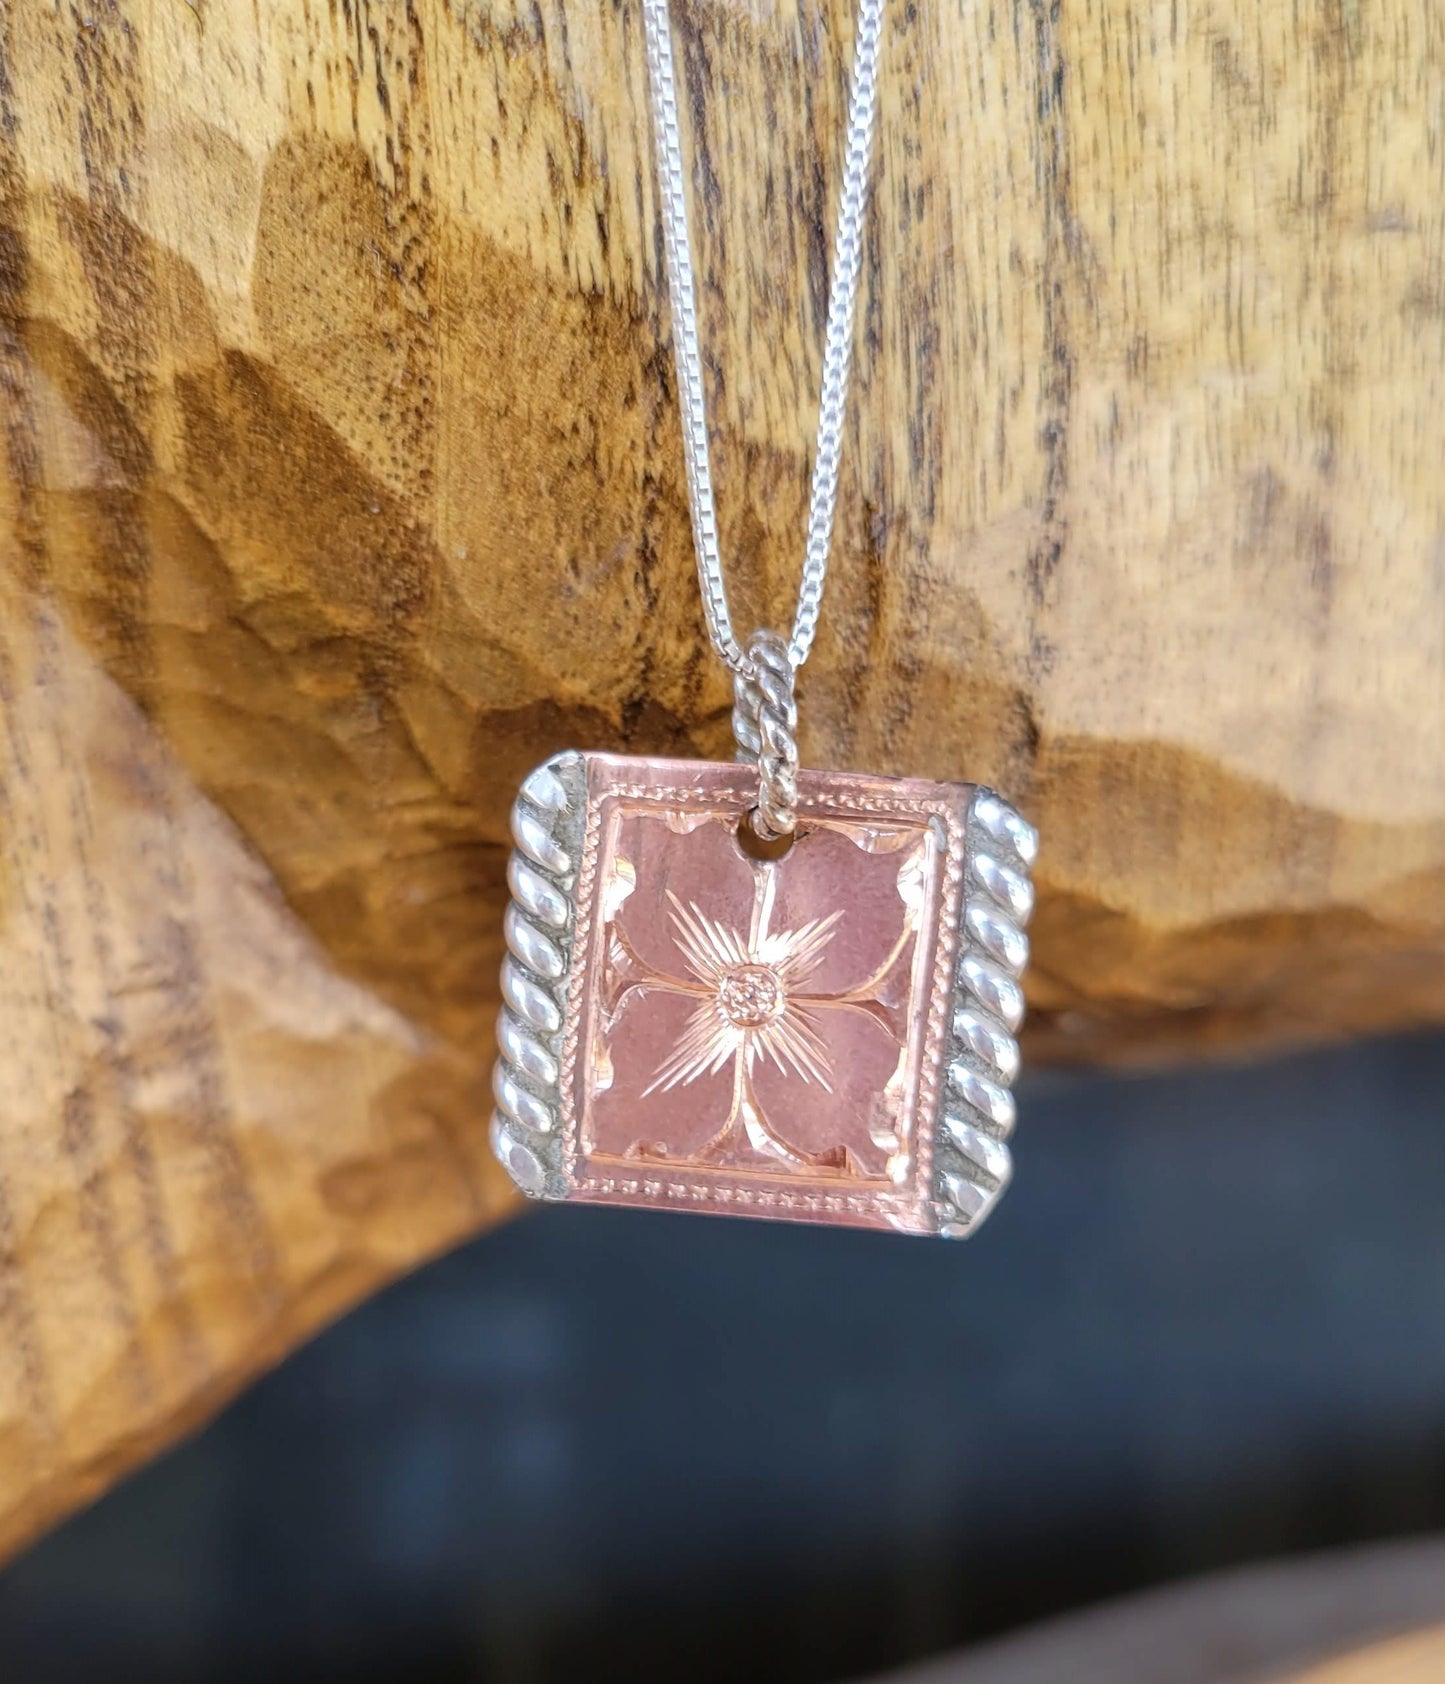 Copper Pendant, Sterling Silver Rope Edge, hand engraved Flower, cowgirl jewelry, gifts for cowgirls